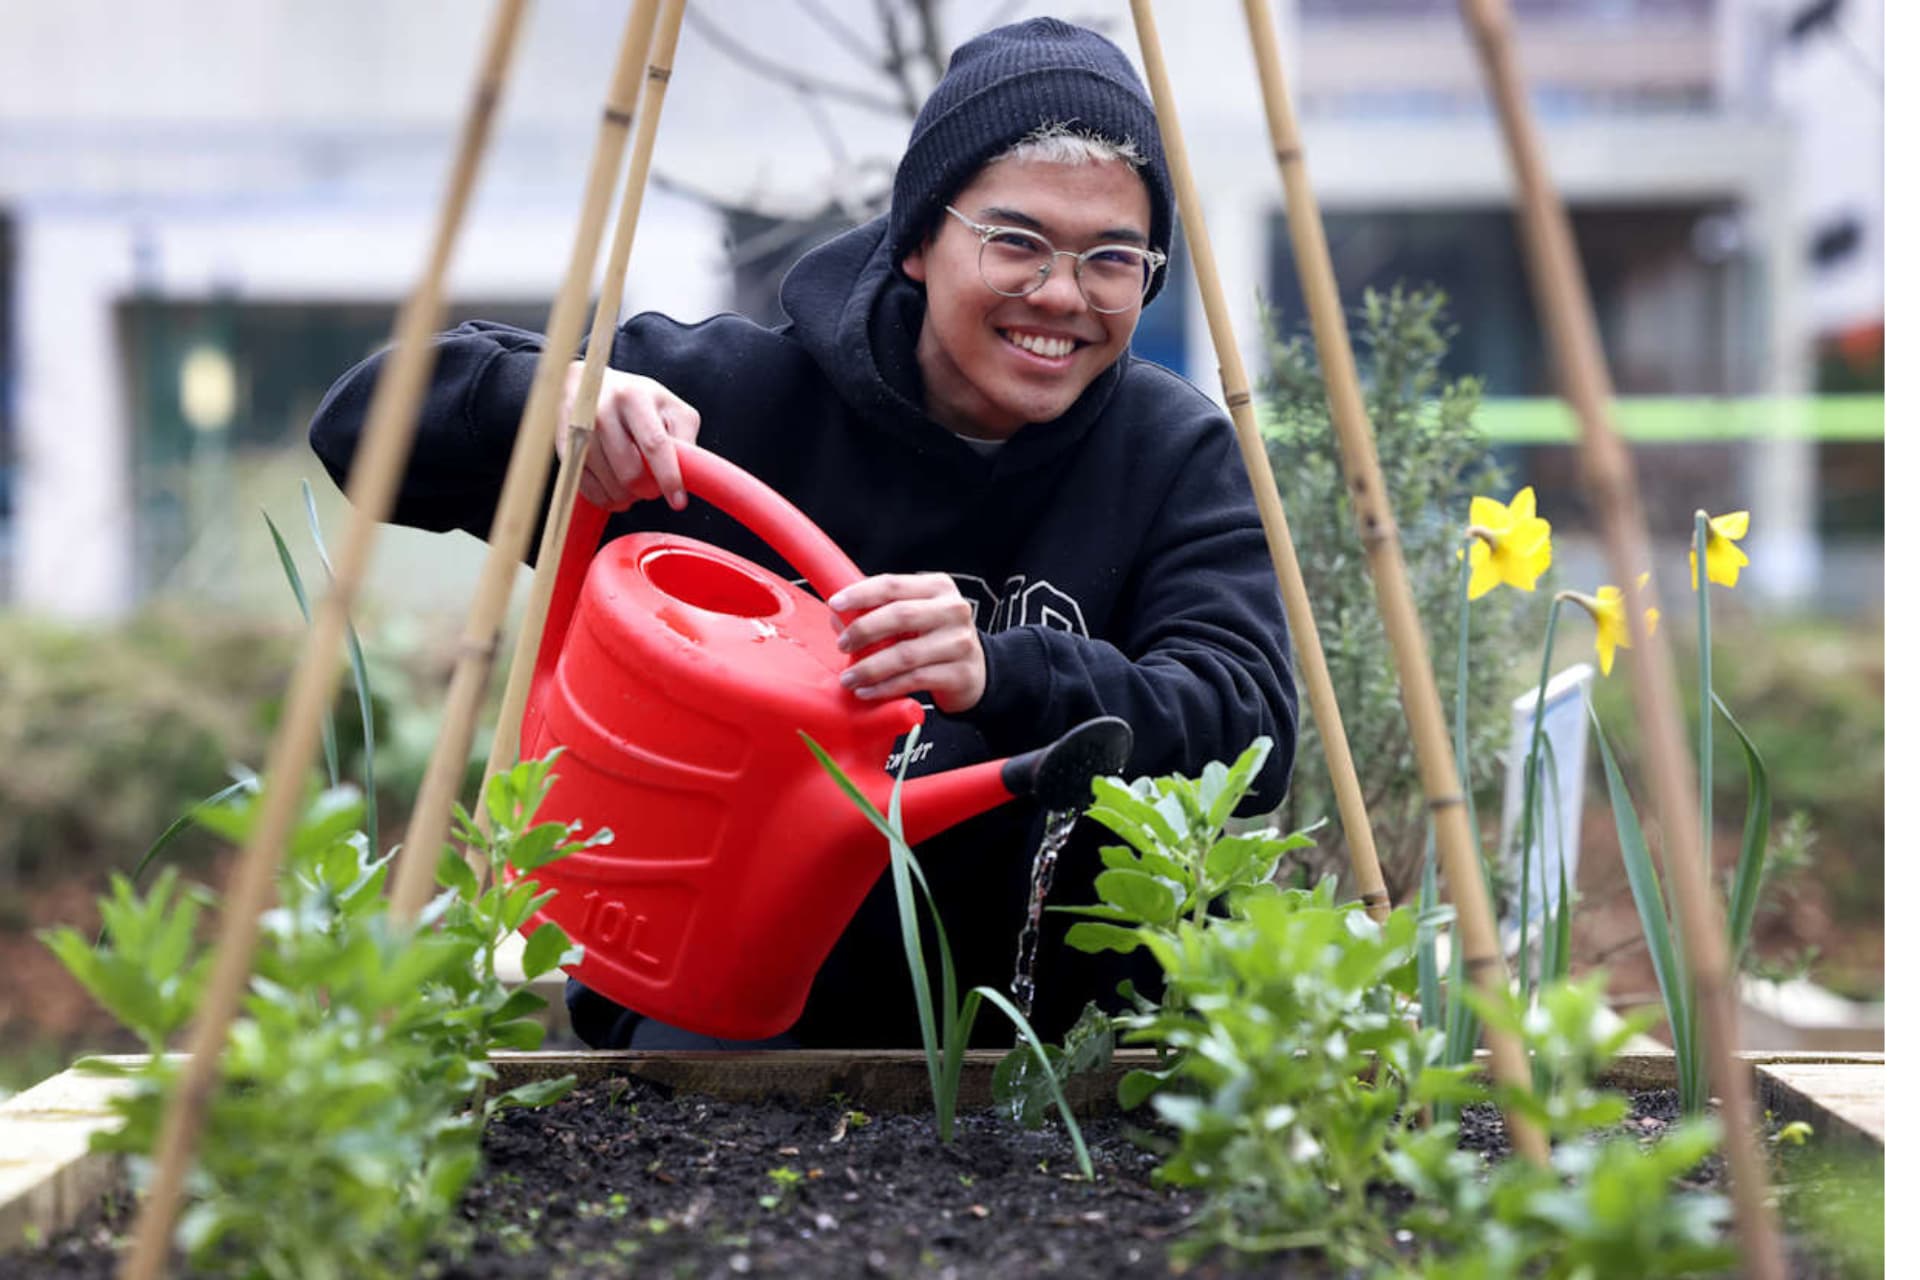 A smiling student watering plants with a red watering can.